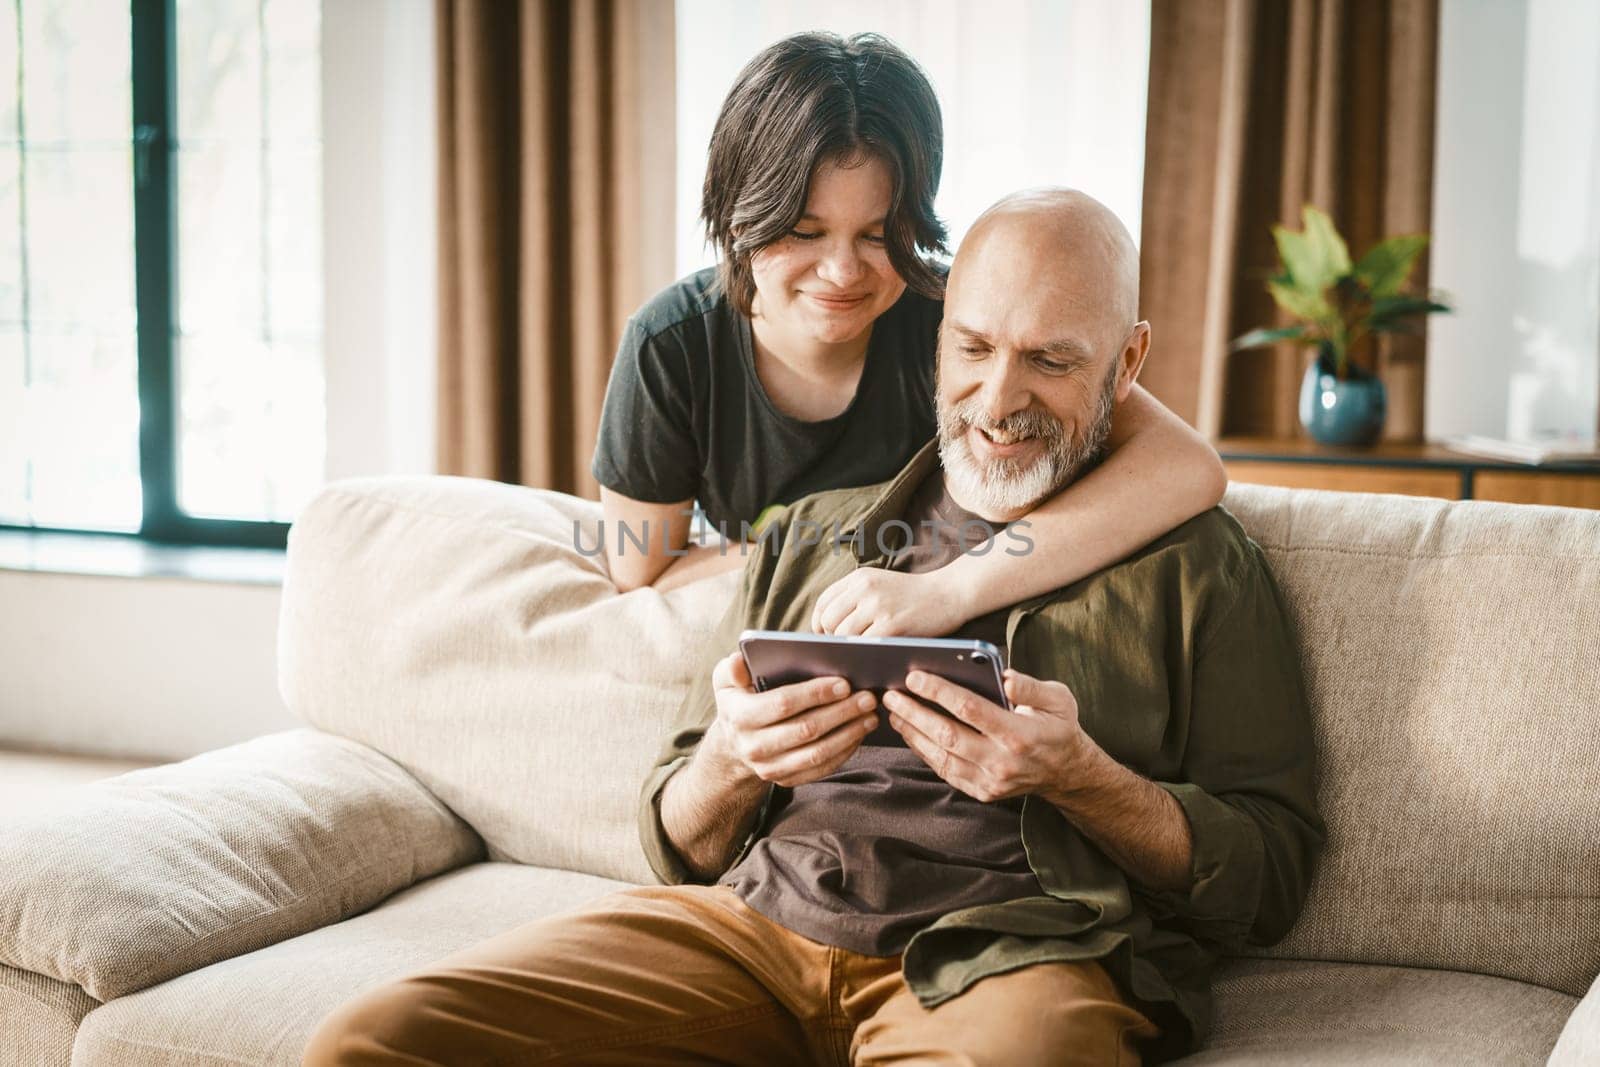 Father and daughter spend quality time together playing online games. Senior man sits comfortably on sofa while teenager affectionately hugs him, showcasing their strong family connection. by LipikStockMedia